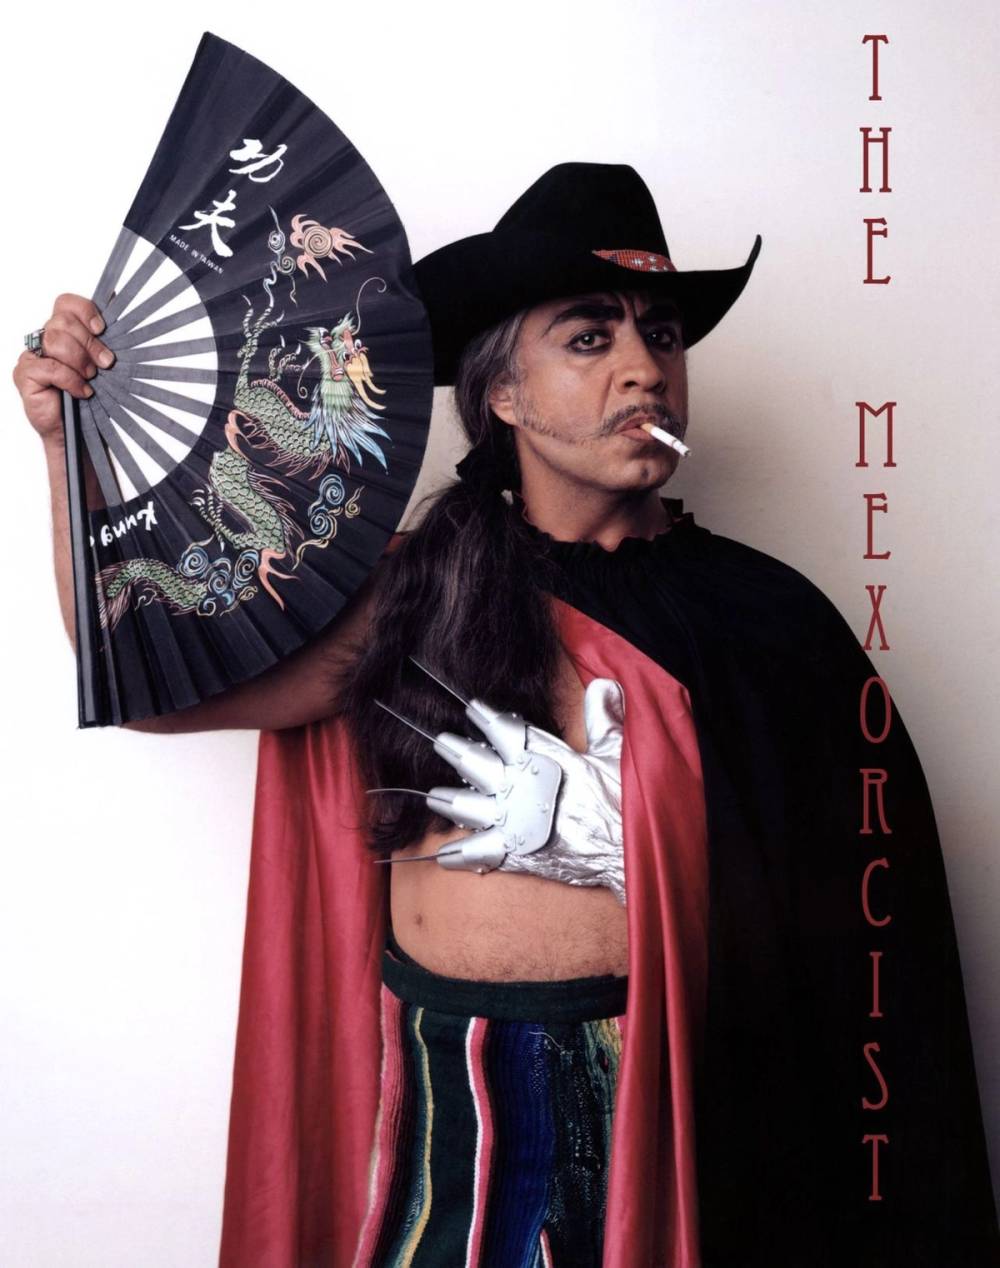 Gómez-Peña in black cape, black cowboy hat, holding an Asian fan in one hand and with a white Freddy Krueger style knife-glove in the other. 